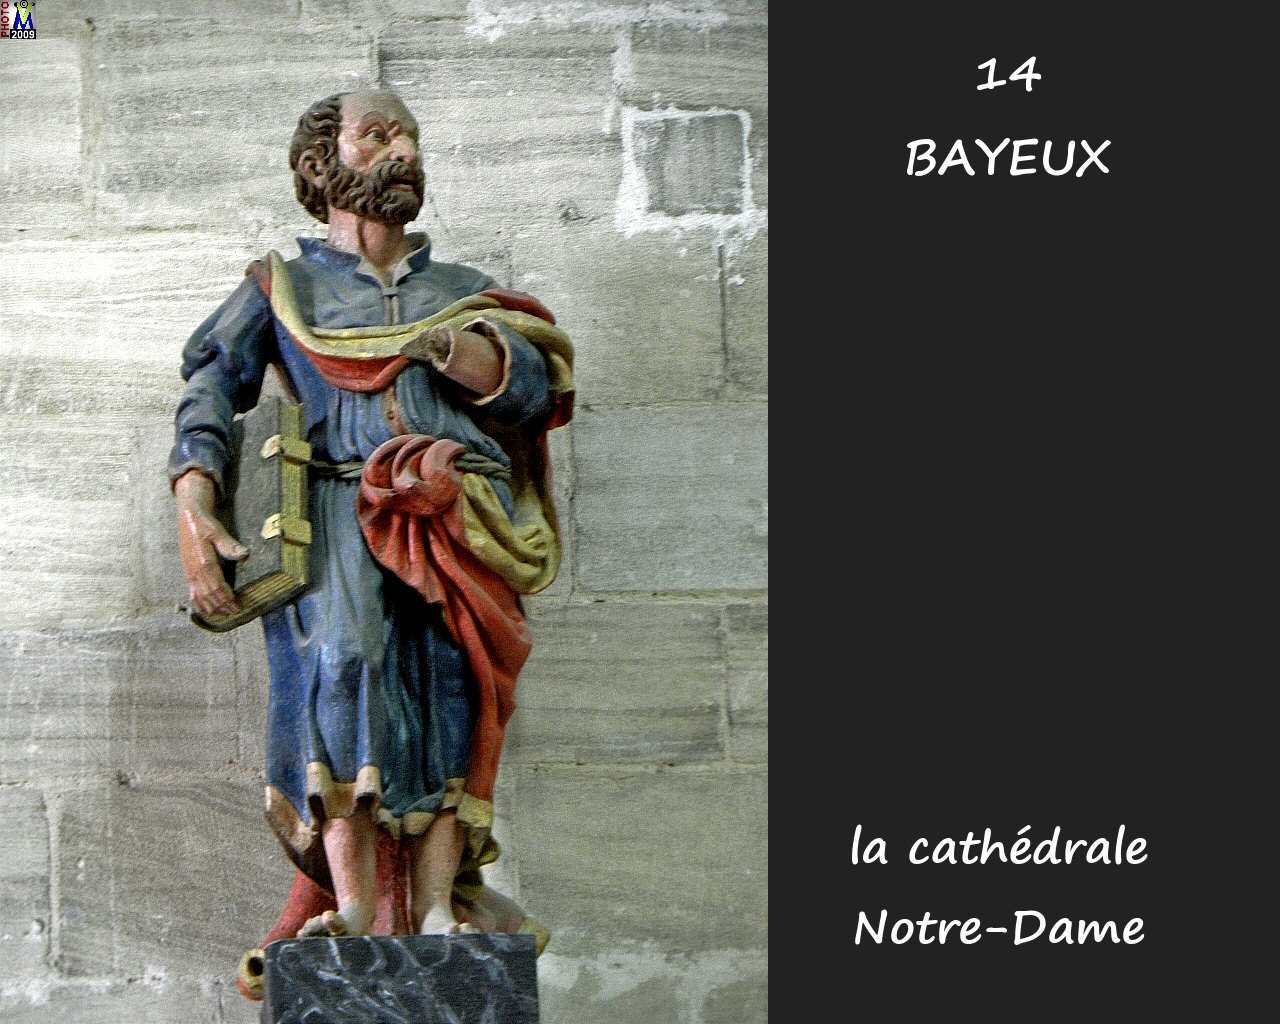 14BAYEUX_cathedrale_262.jpg